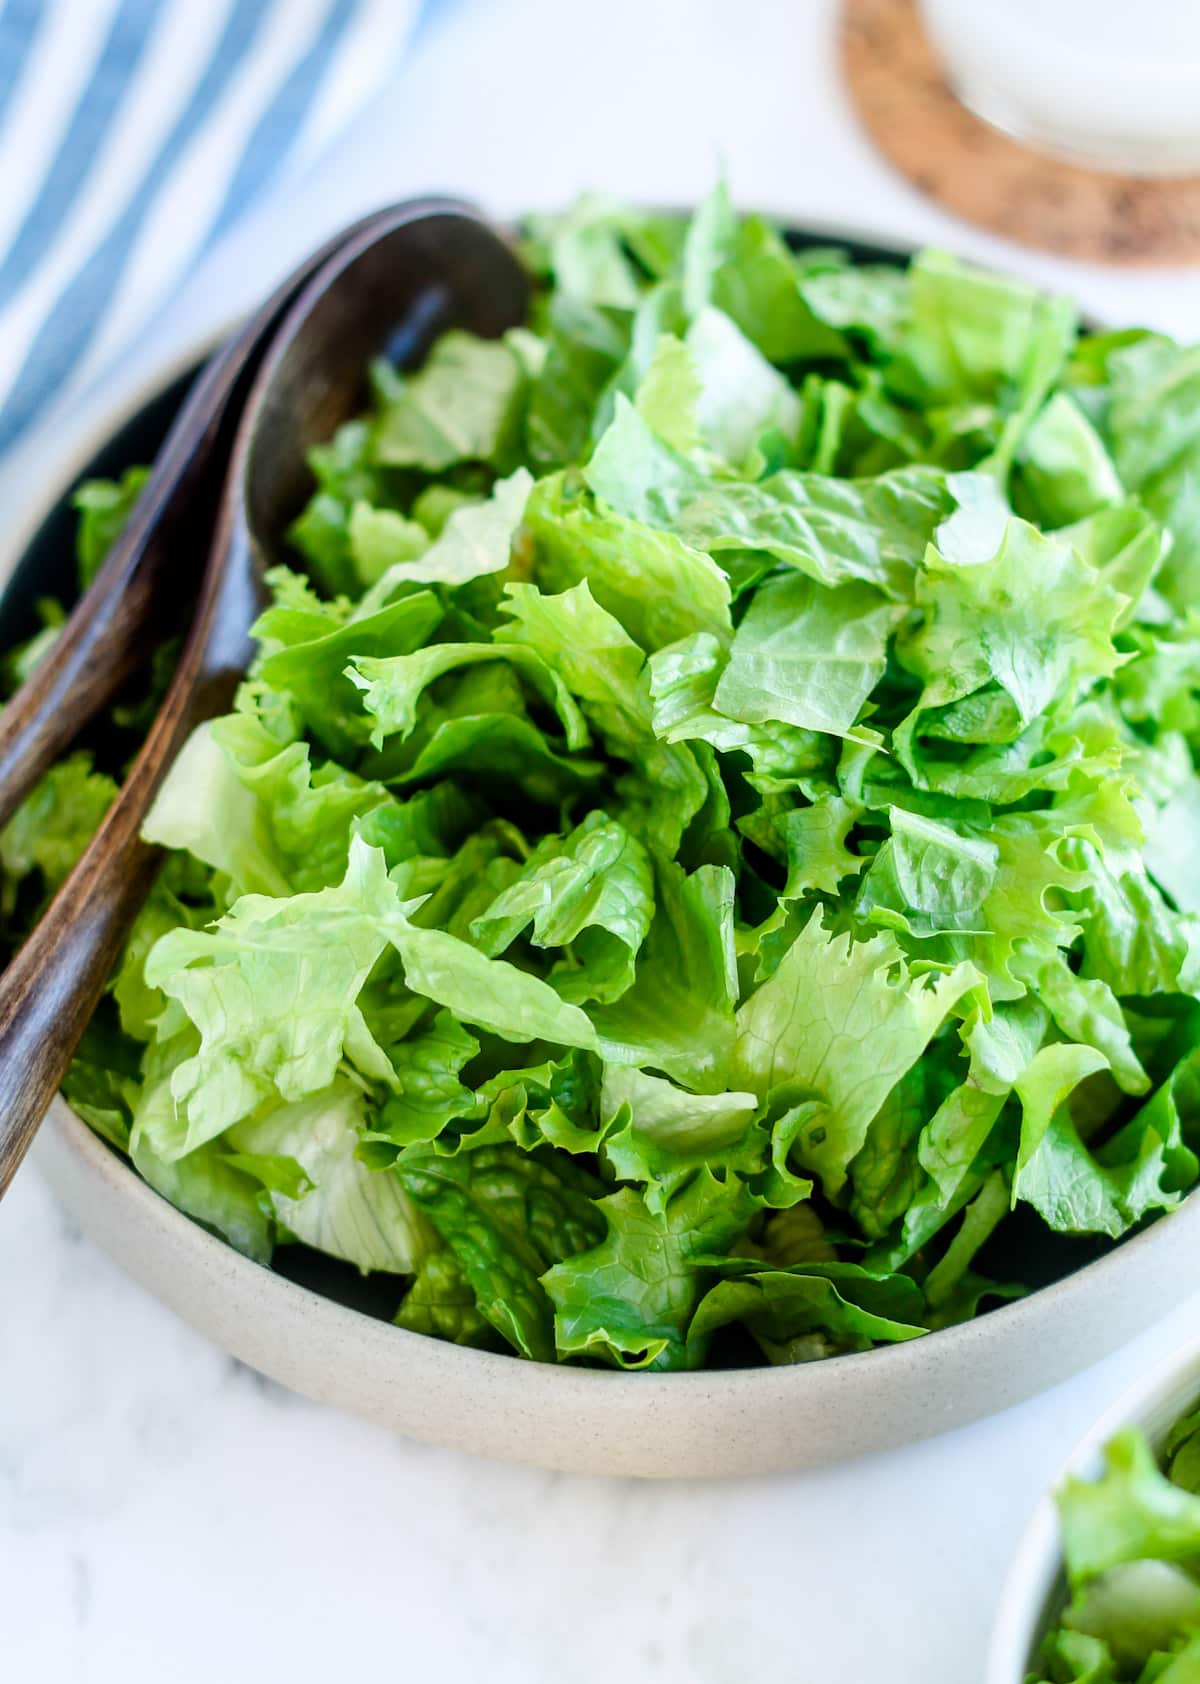 Overhead image of a bowl of lettuce salad.